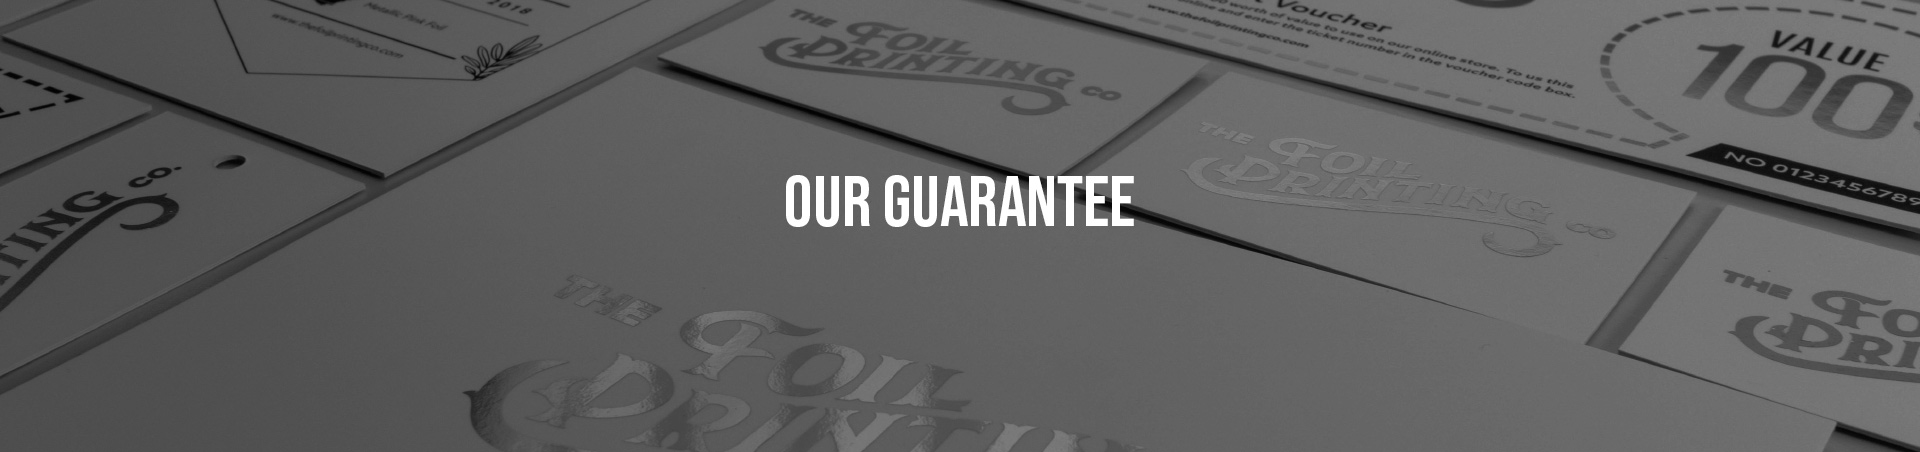 Our Guarantee Banner